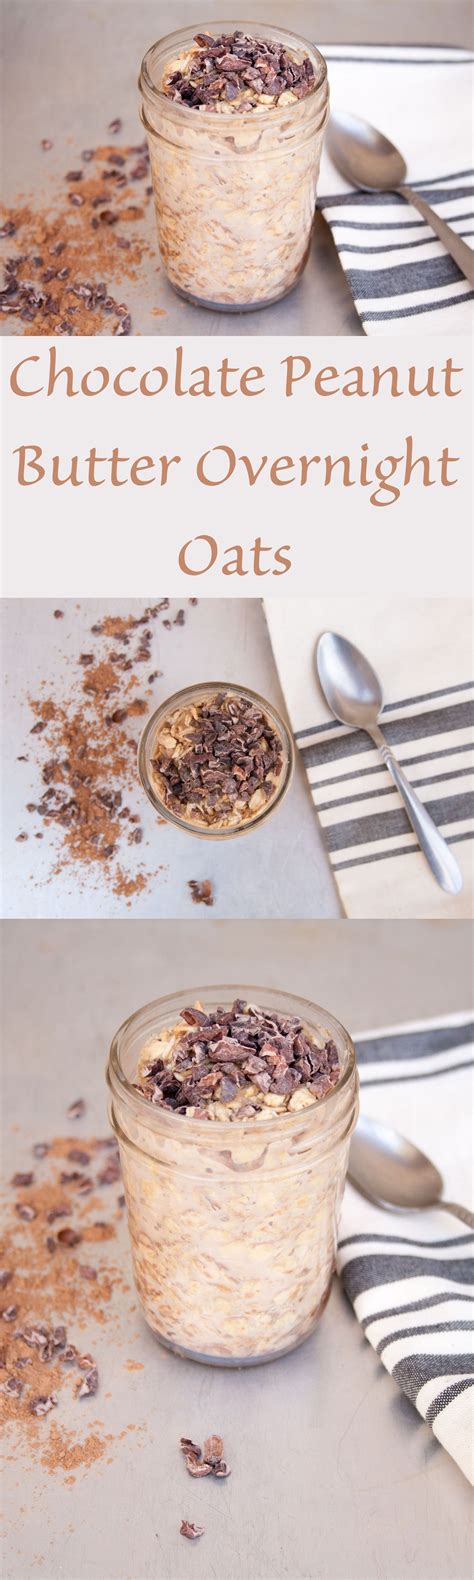 Chocolate Peanut Butter Overnight Oats With Chia Seeds Peanut Butter